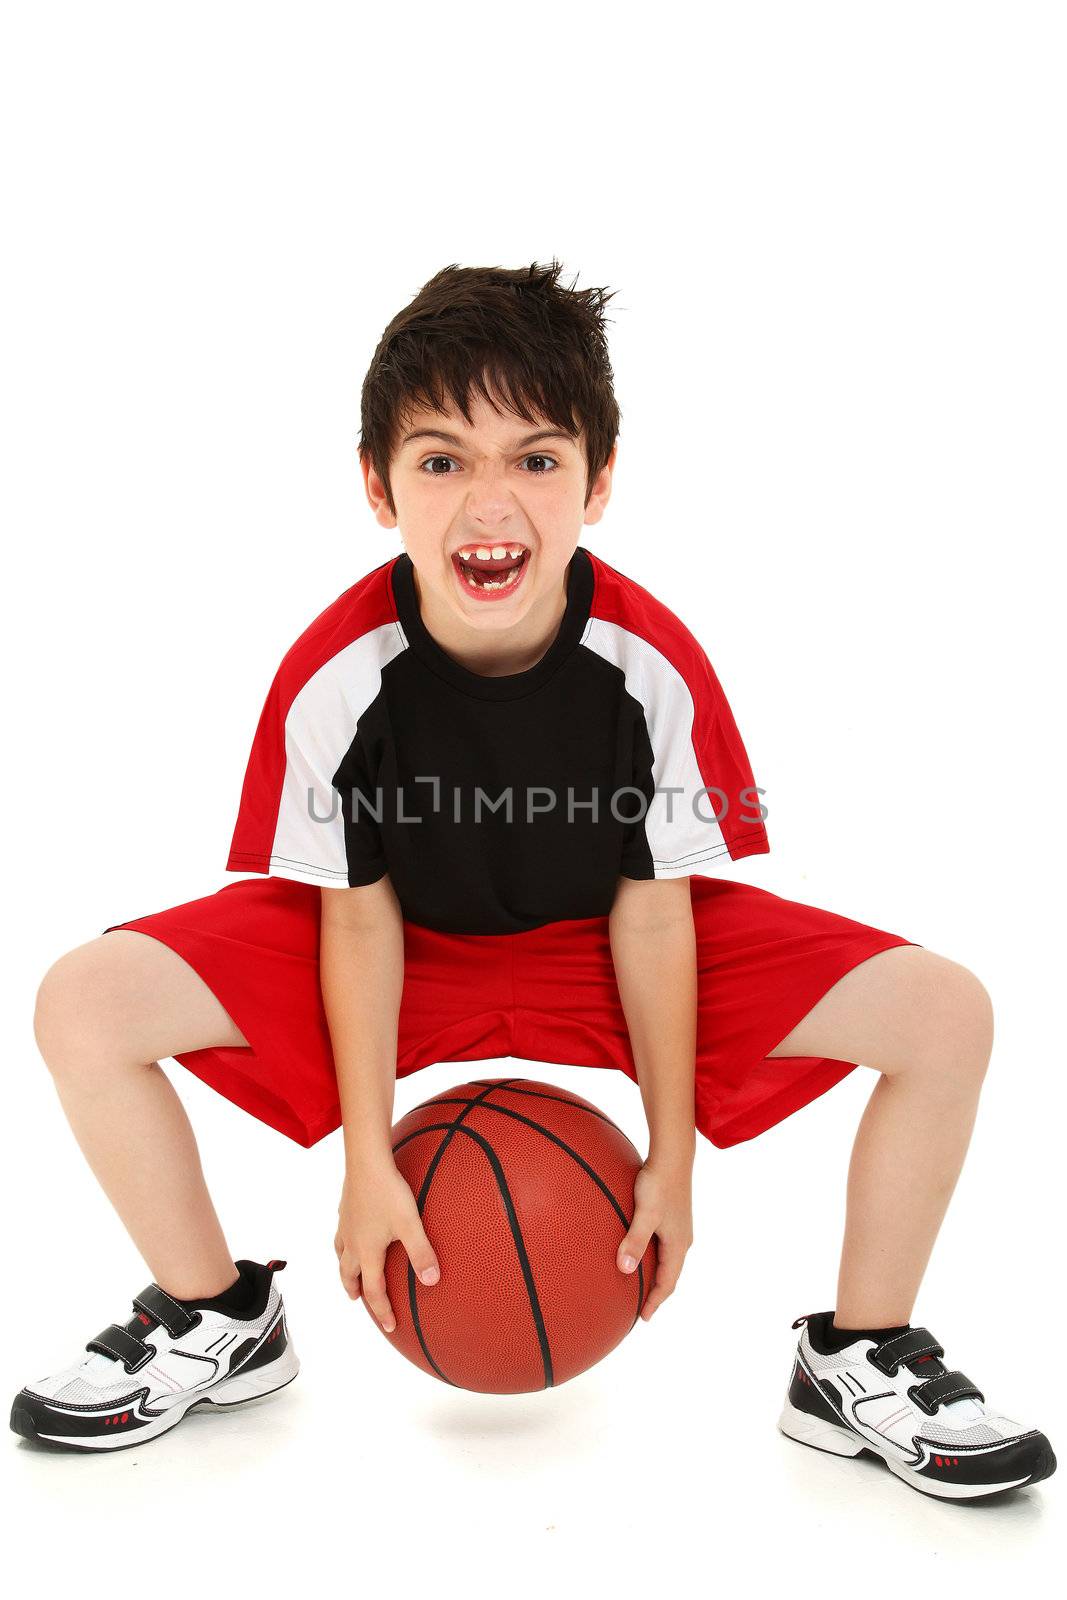 Team sport basketball player child with ball making crazy expressions.